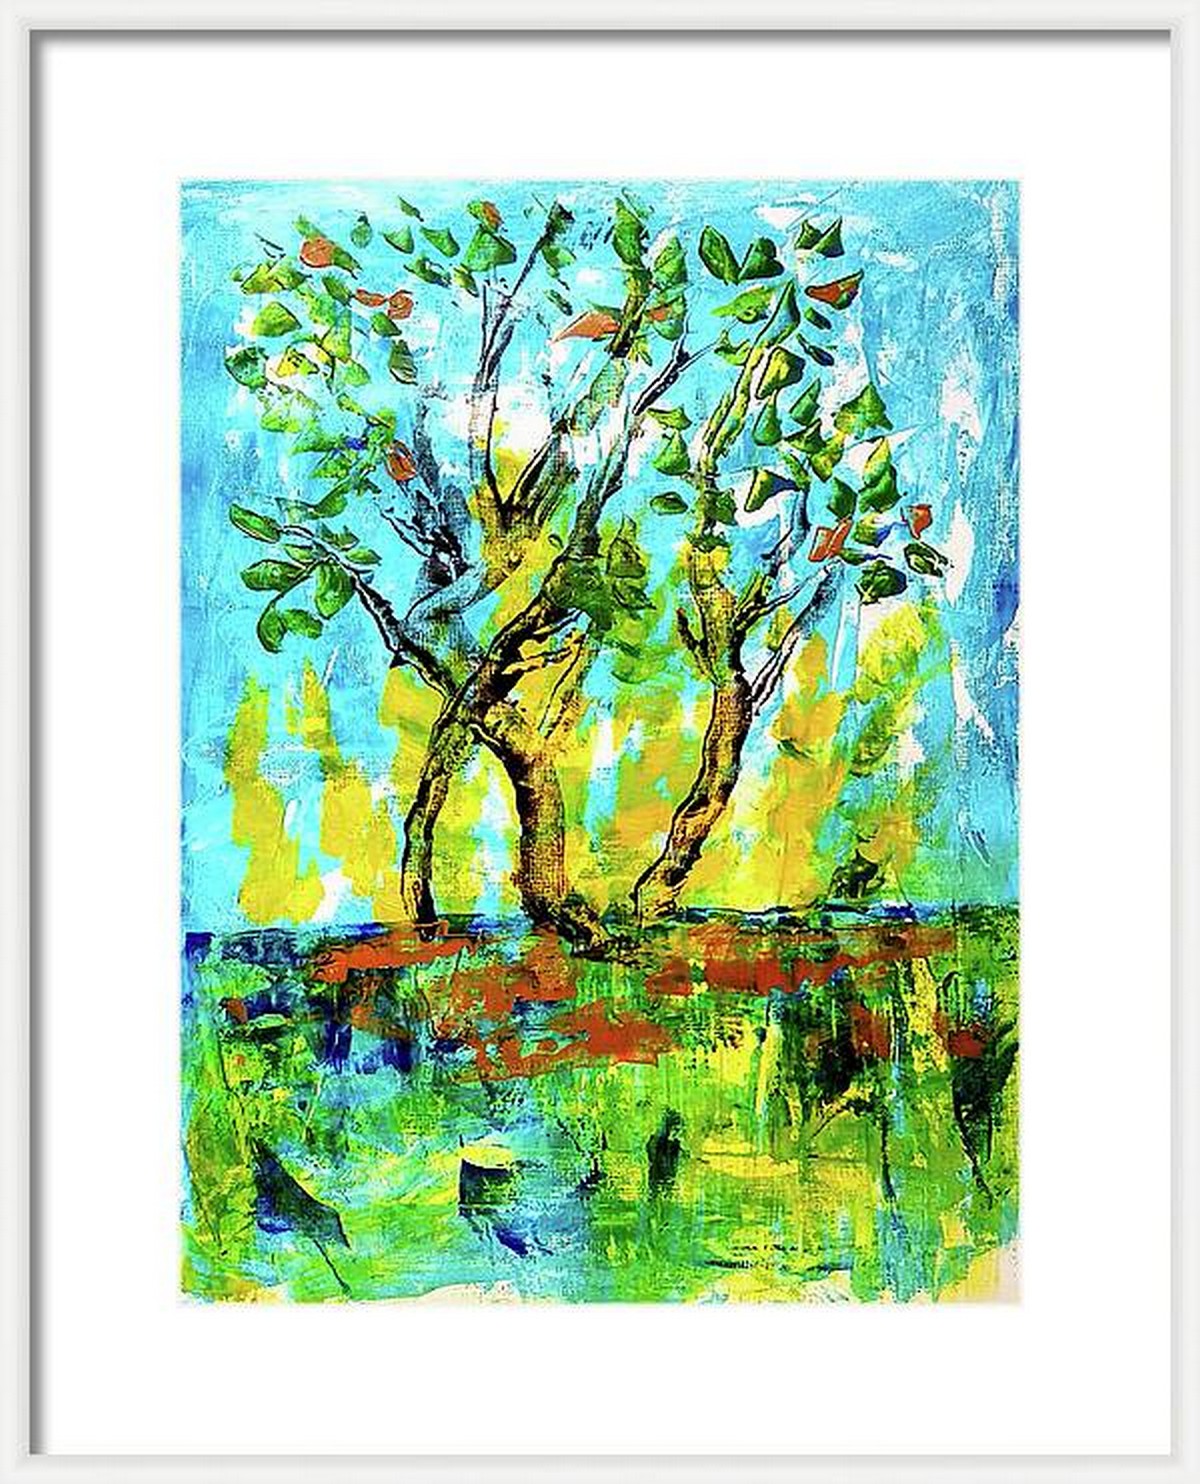 Virtual framed view, The Tree, an abstract painting